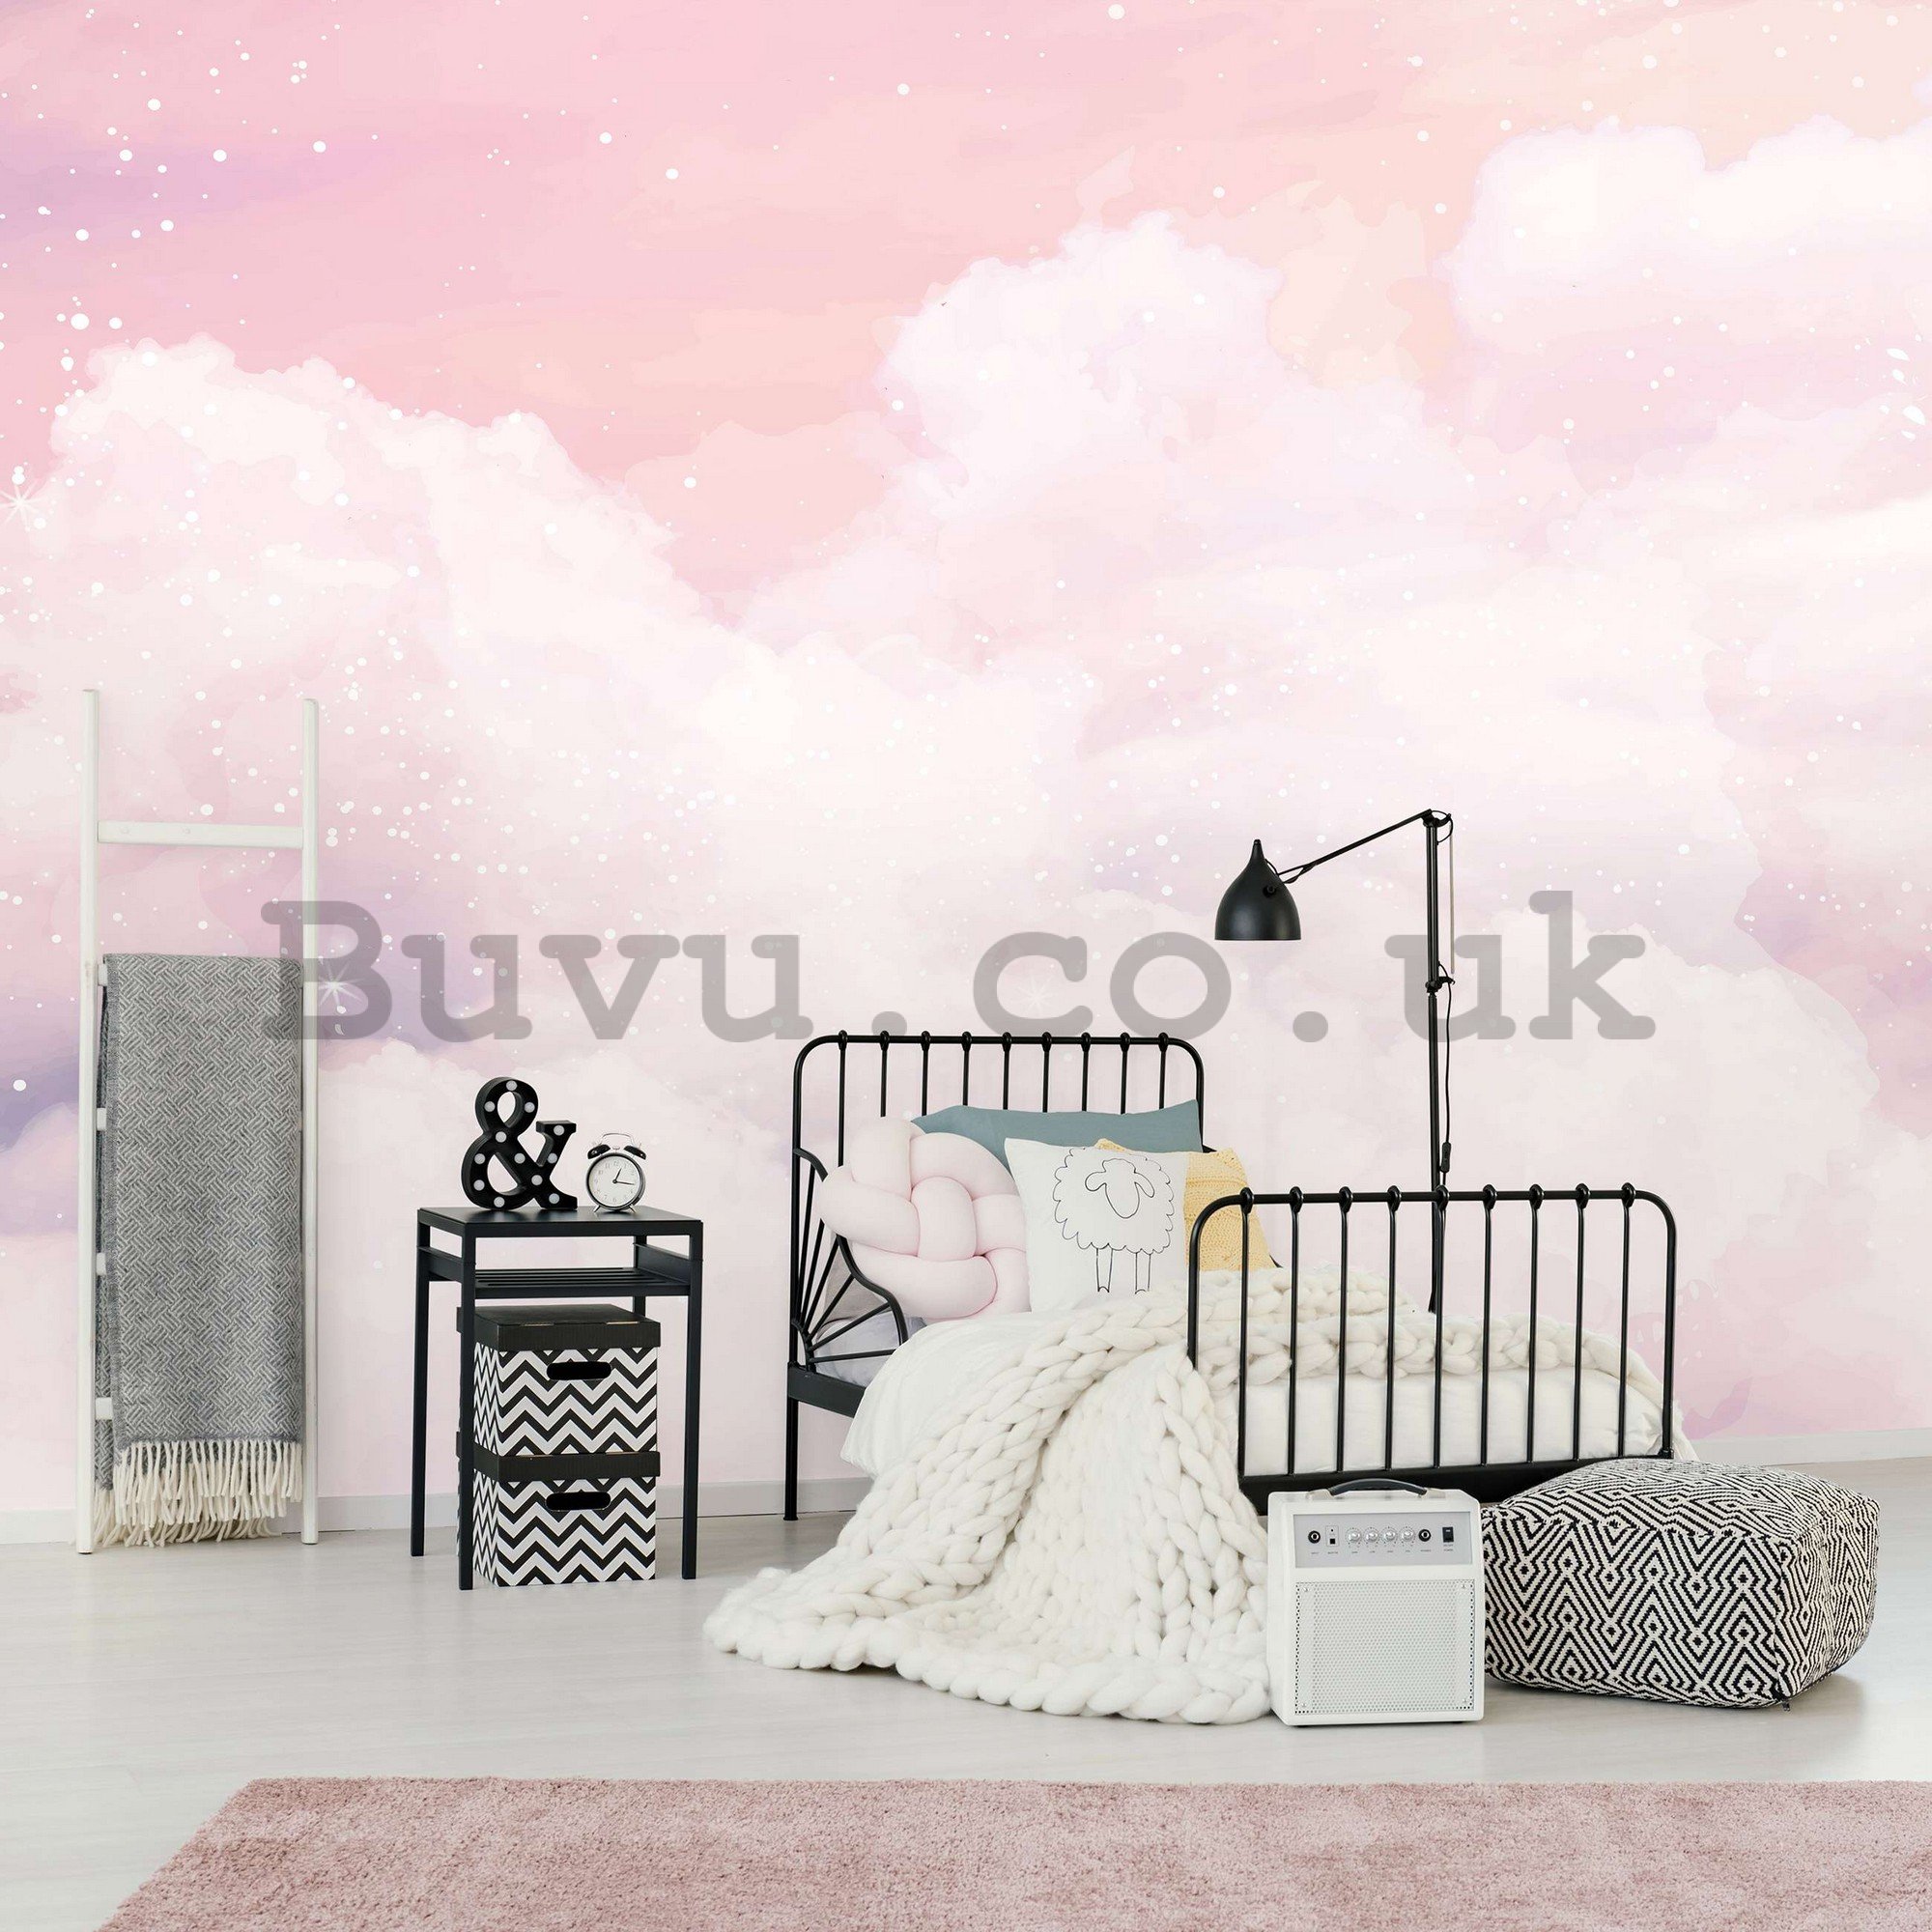 Wall mural vlies: Sky with clouds - 416x254 cm